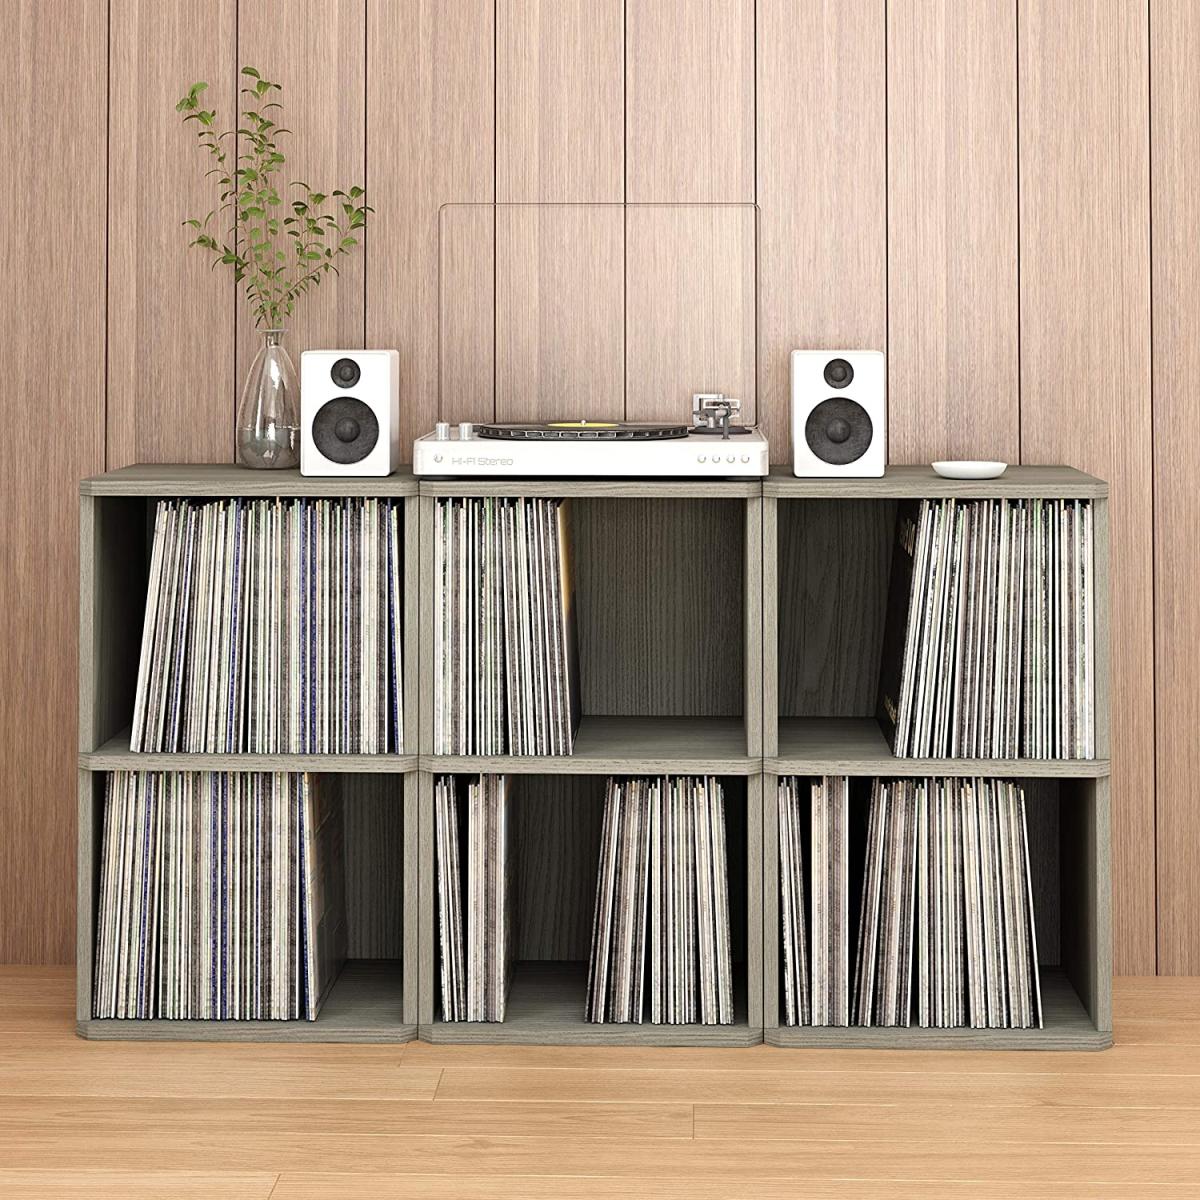 RS Recommends: The Best Shelving for Your Vinyl Records - Yahoo Sports